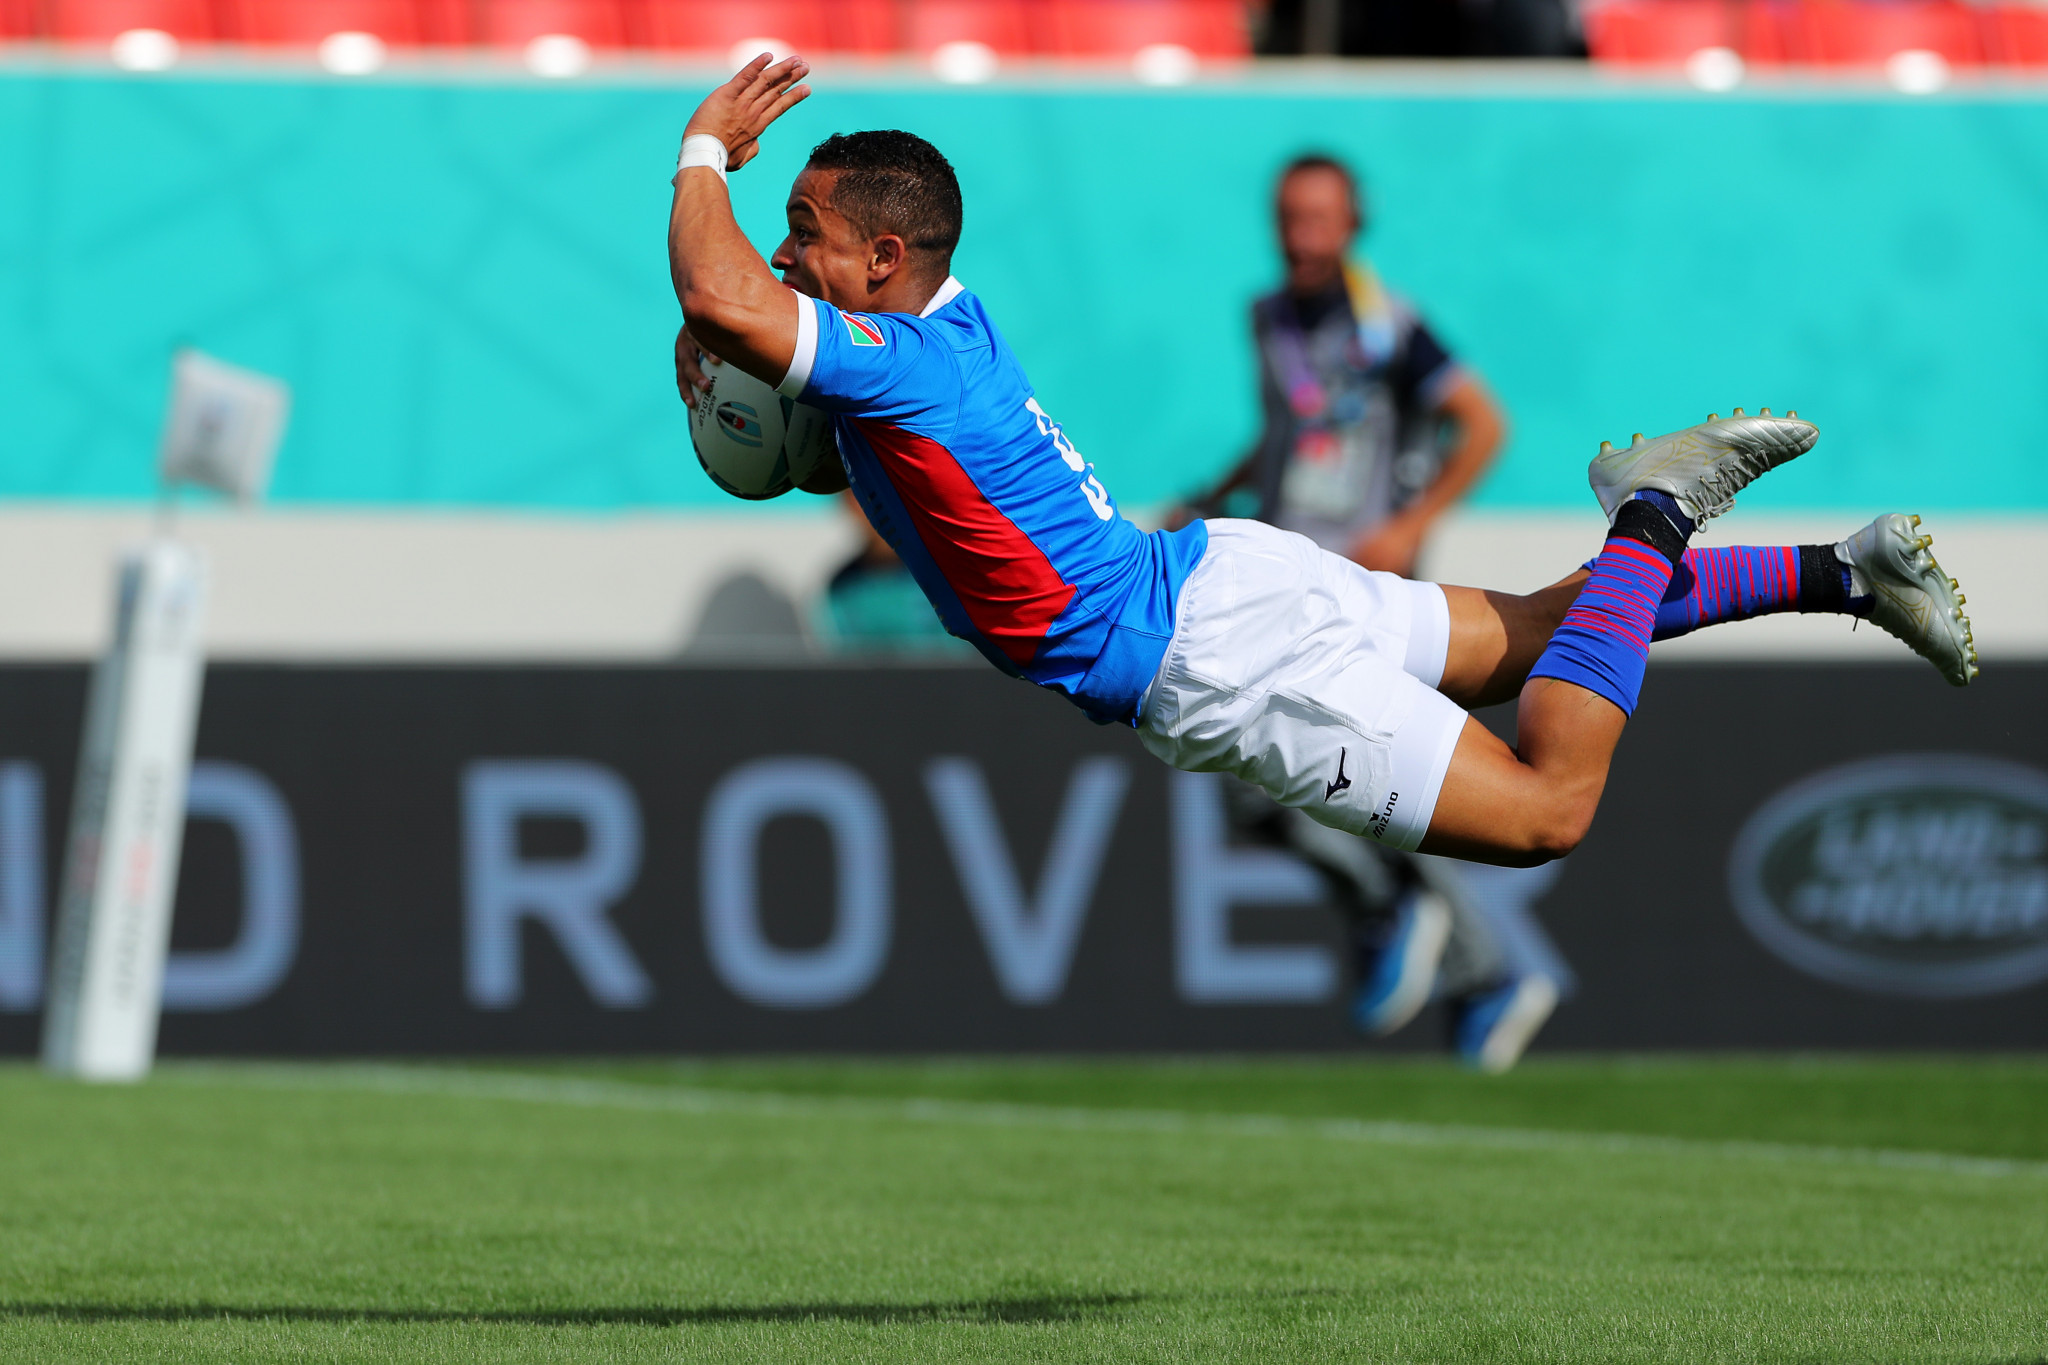 Damian Stevens dived over to give Namibia a surprise lead against Italy ©Getty Images